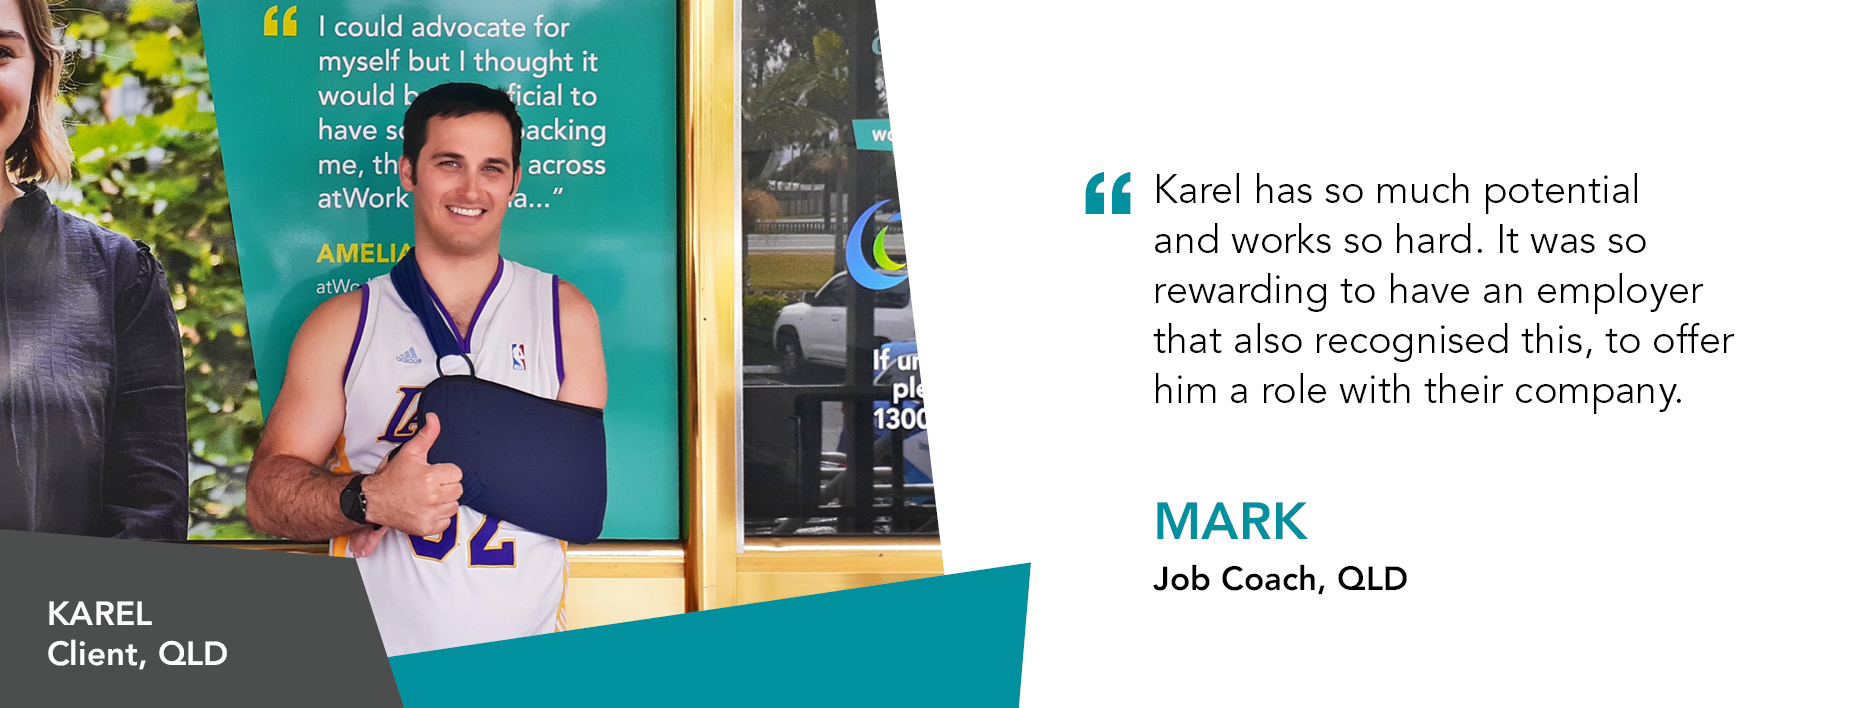 Quote reads “Karel has so much potential and works so hard. It was so rewarding to have an employer that also recognised this, to offer him a role with their company,” – Mark, Job Coach QLD